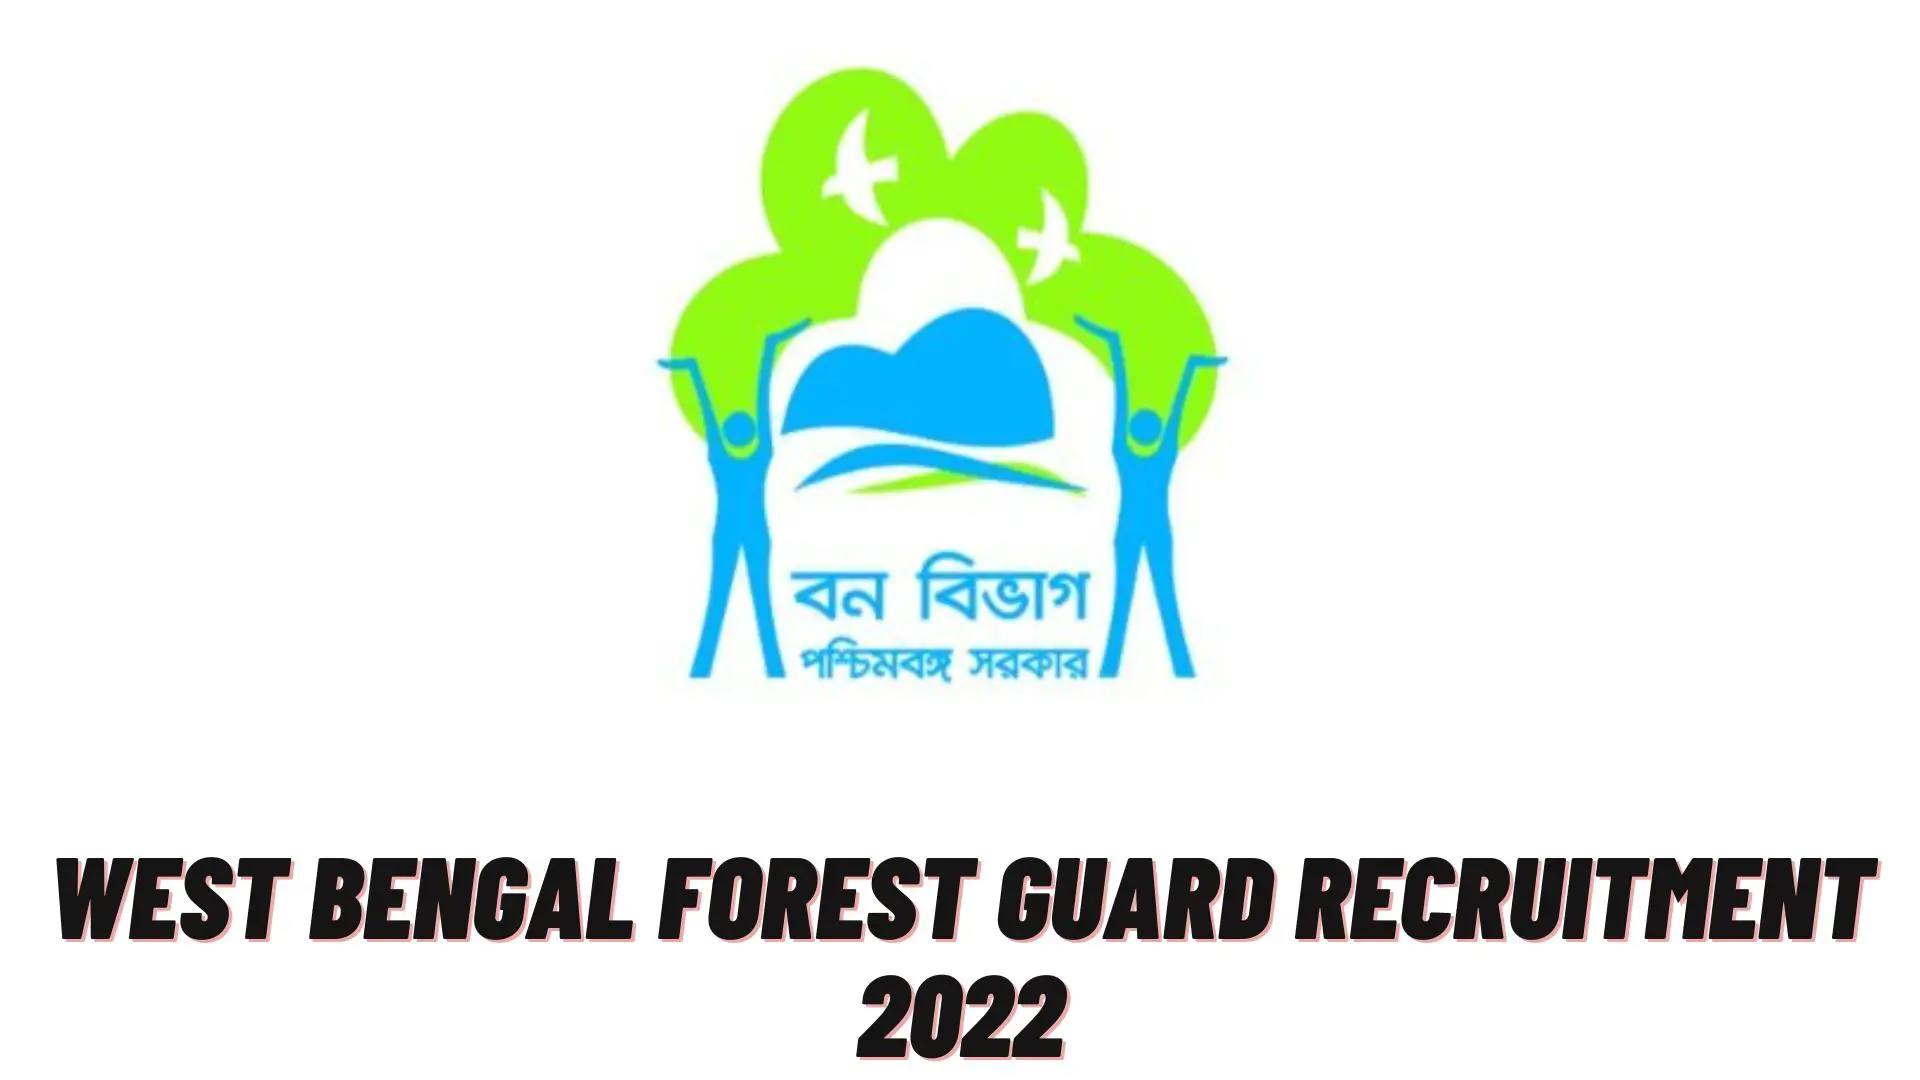 West Bengal Forest Guard Recruitment 2022